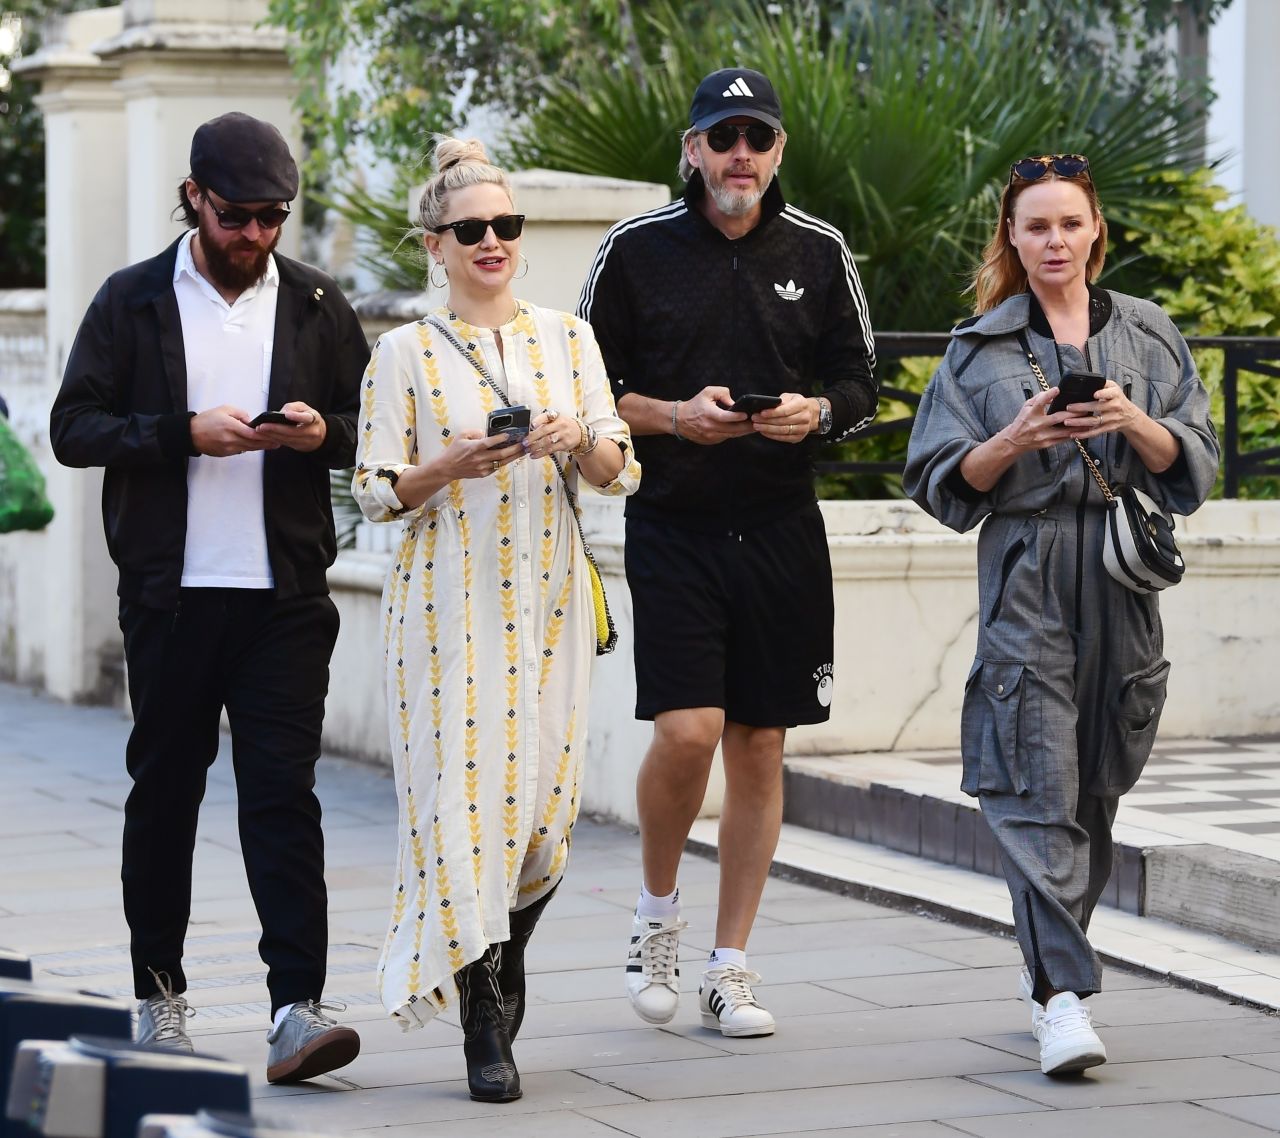 Kate Hudson With Her Fiancé Danny Fujikawa With Stella McCartney and Her  Husband Alasdhair Willis in Notting Hill 07/06/2023 • CelebMafia